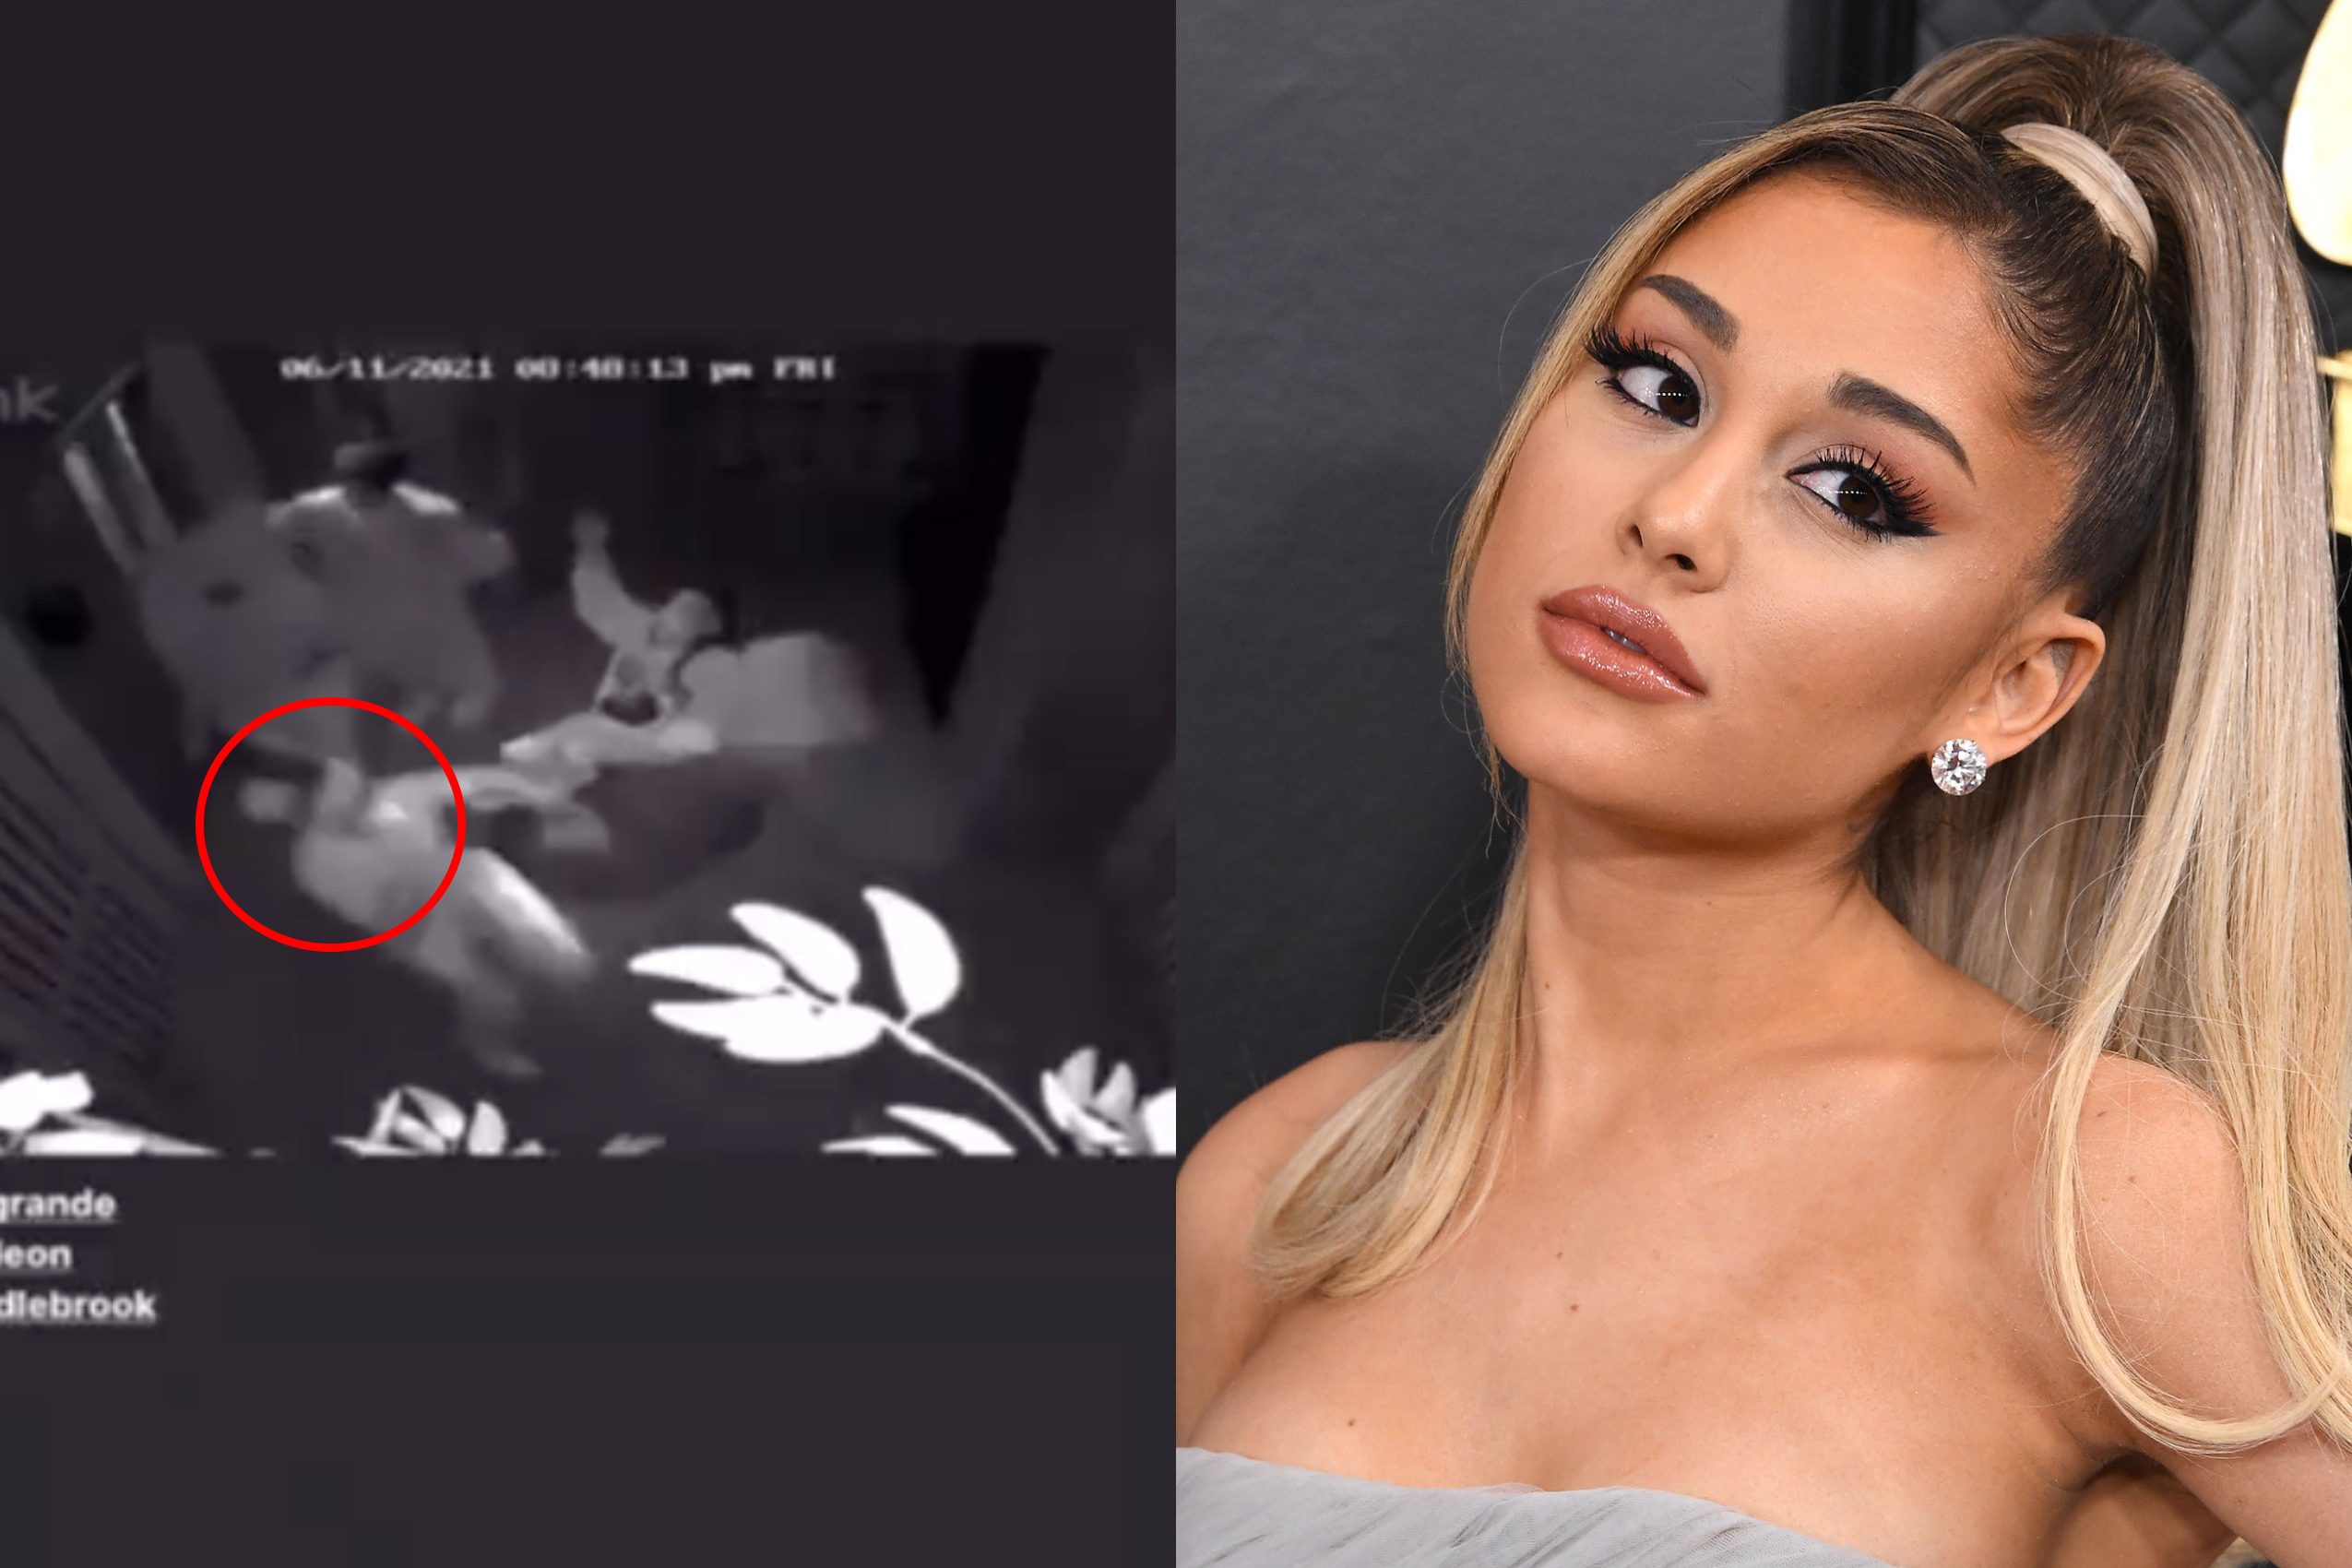 Harry Potter Ariana Grande Porn - Ariana Grande Fan Explains Why Her Deleted Instagram Story Just Isn't It